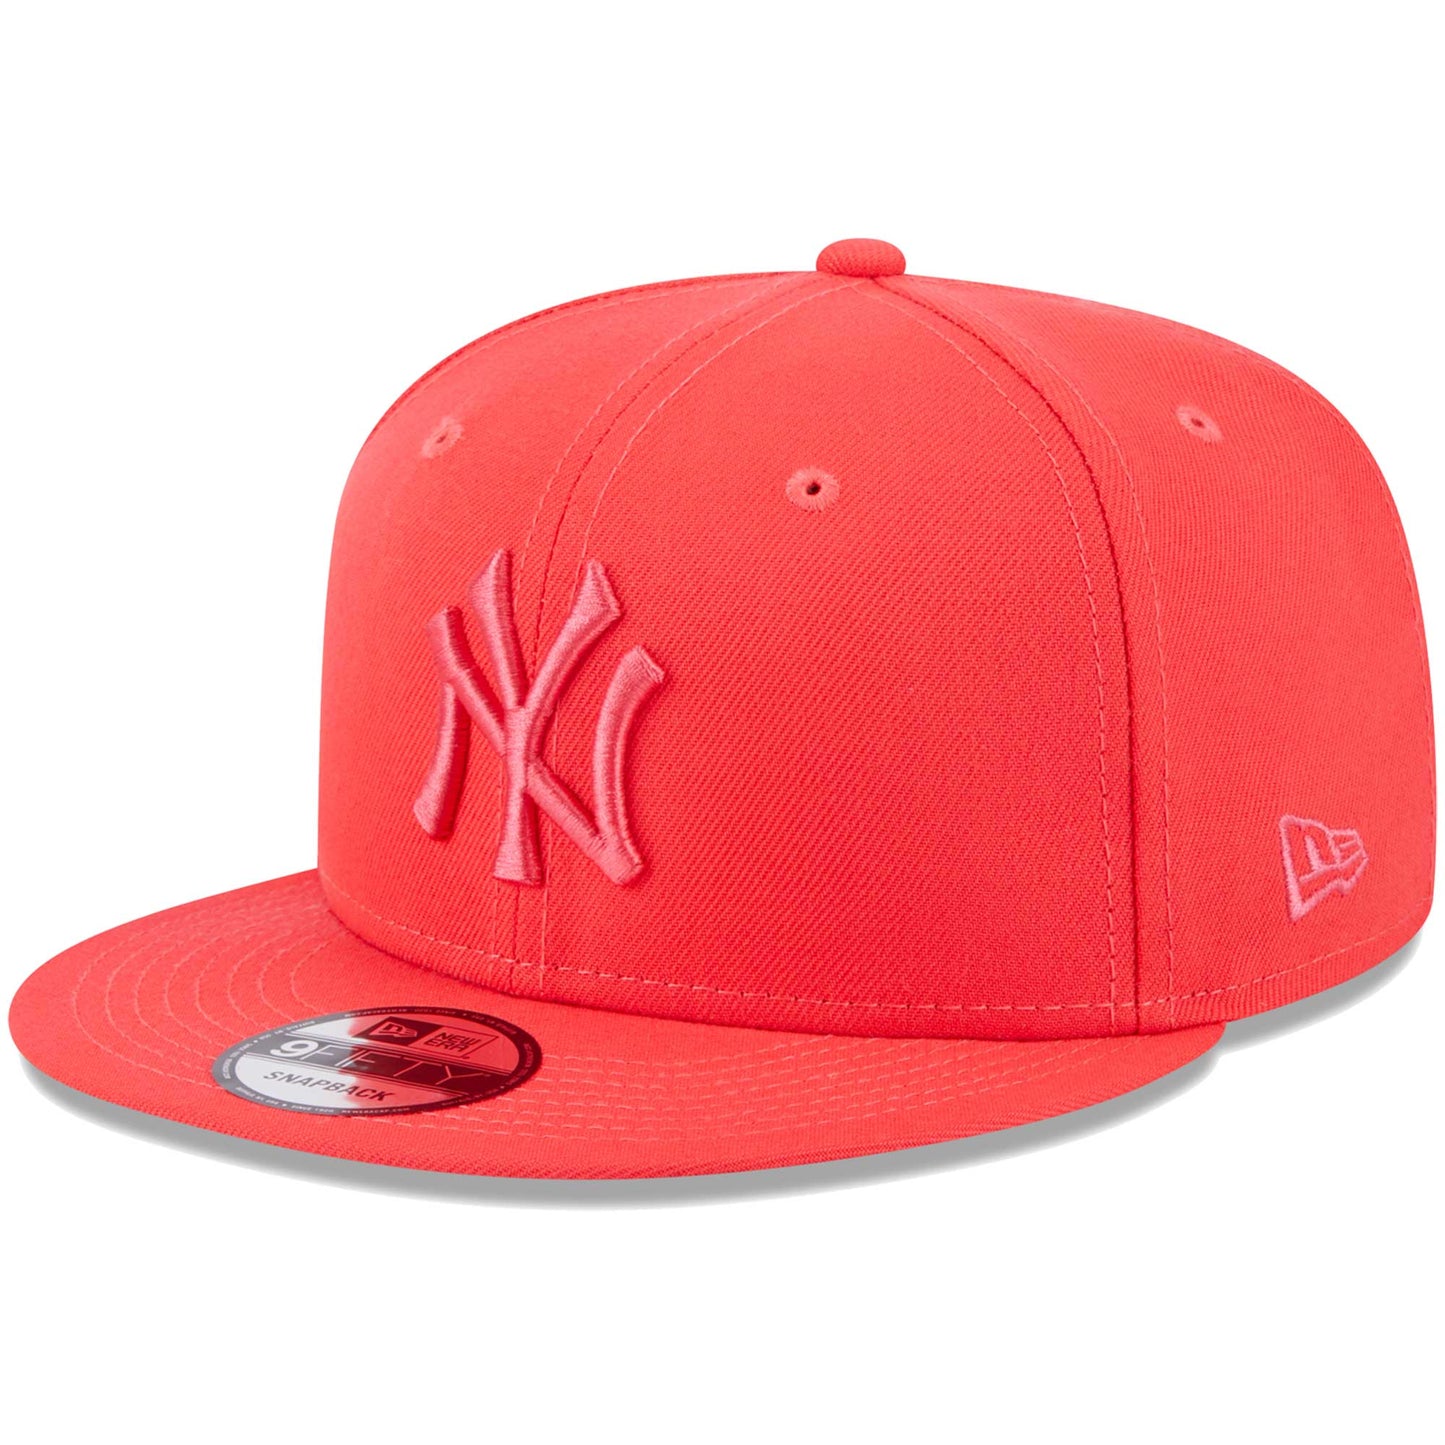 New York Yankees New Era Spring Color Basic 9FIFTY Snapback Hat - Red